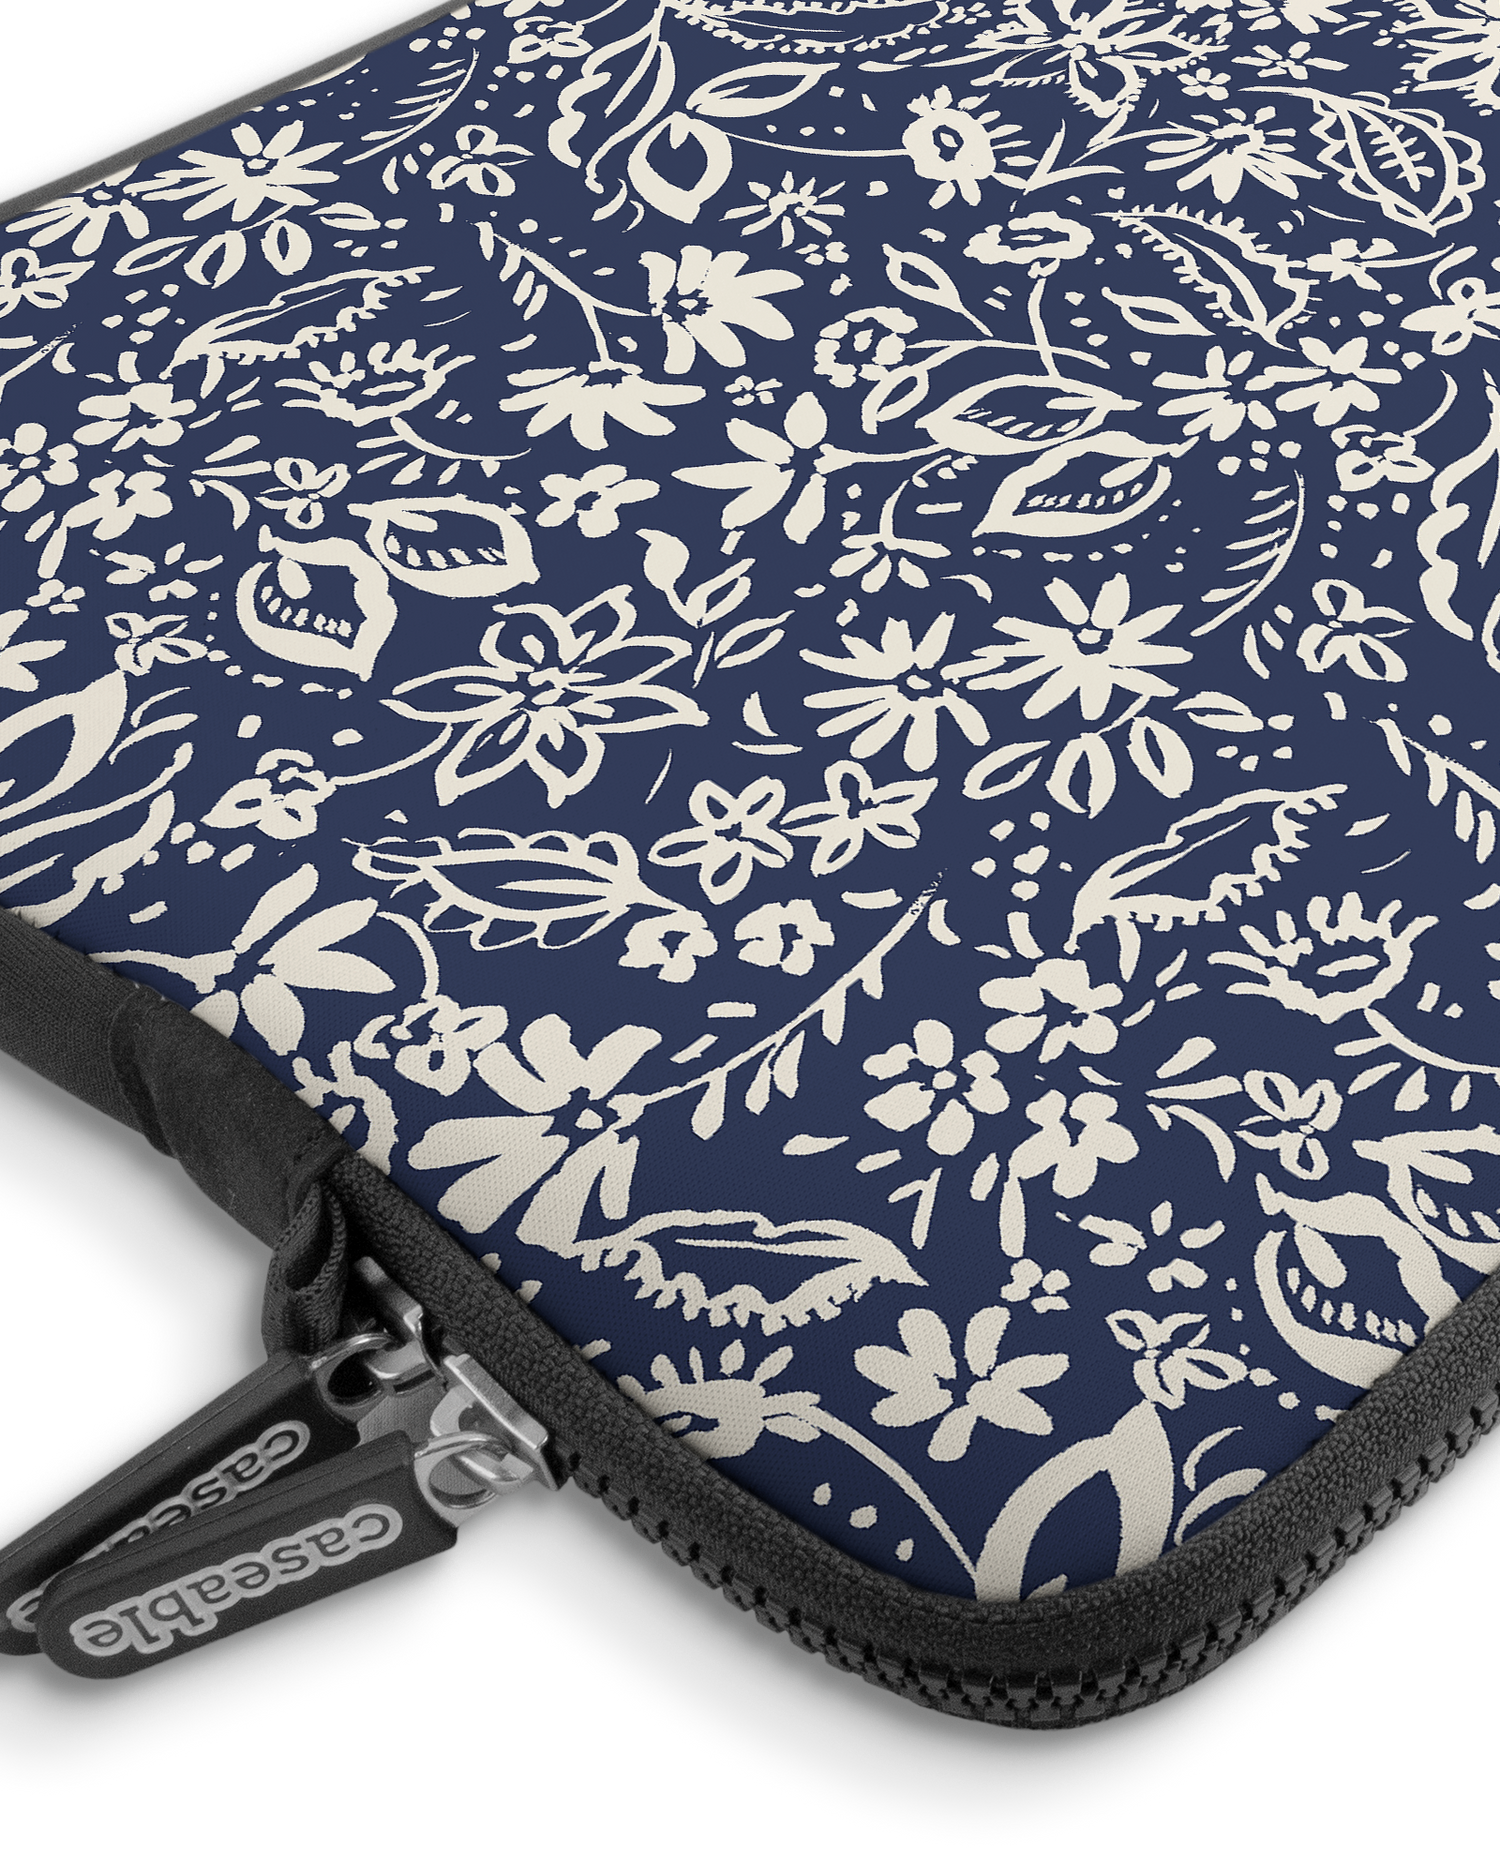 Ditsy Blue Paisley Premium Laptop Bag 13-14 inch with device inside